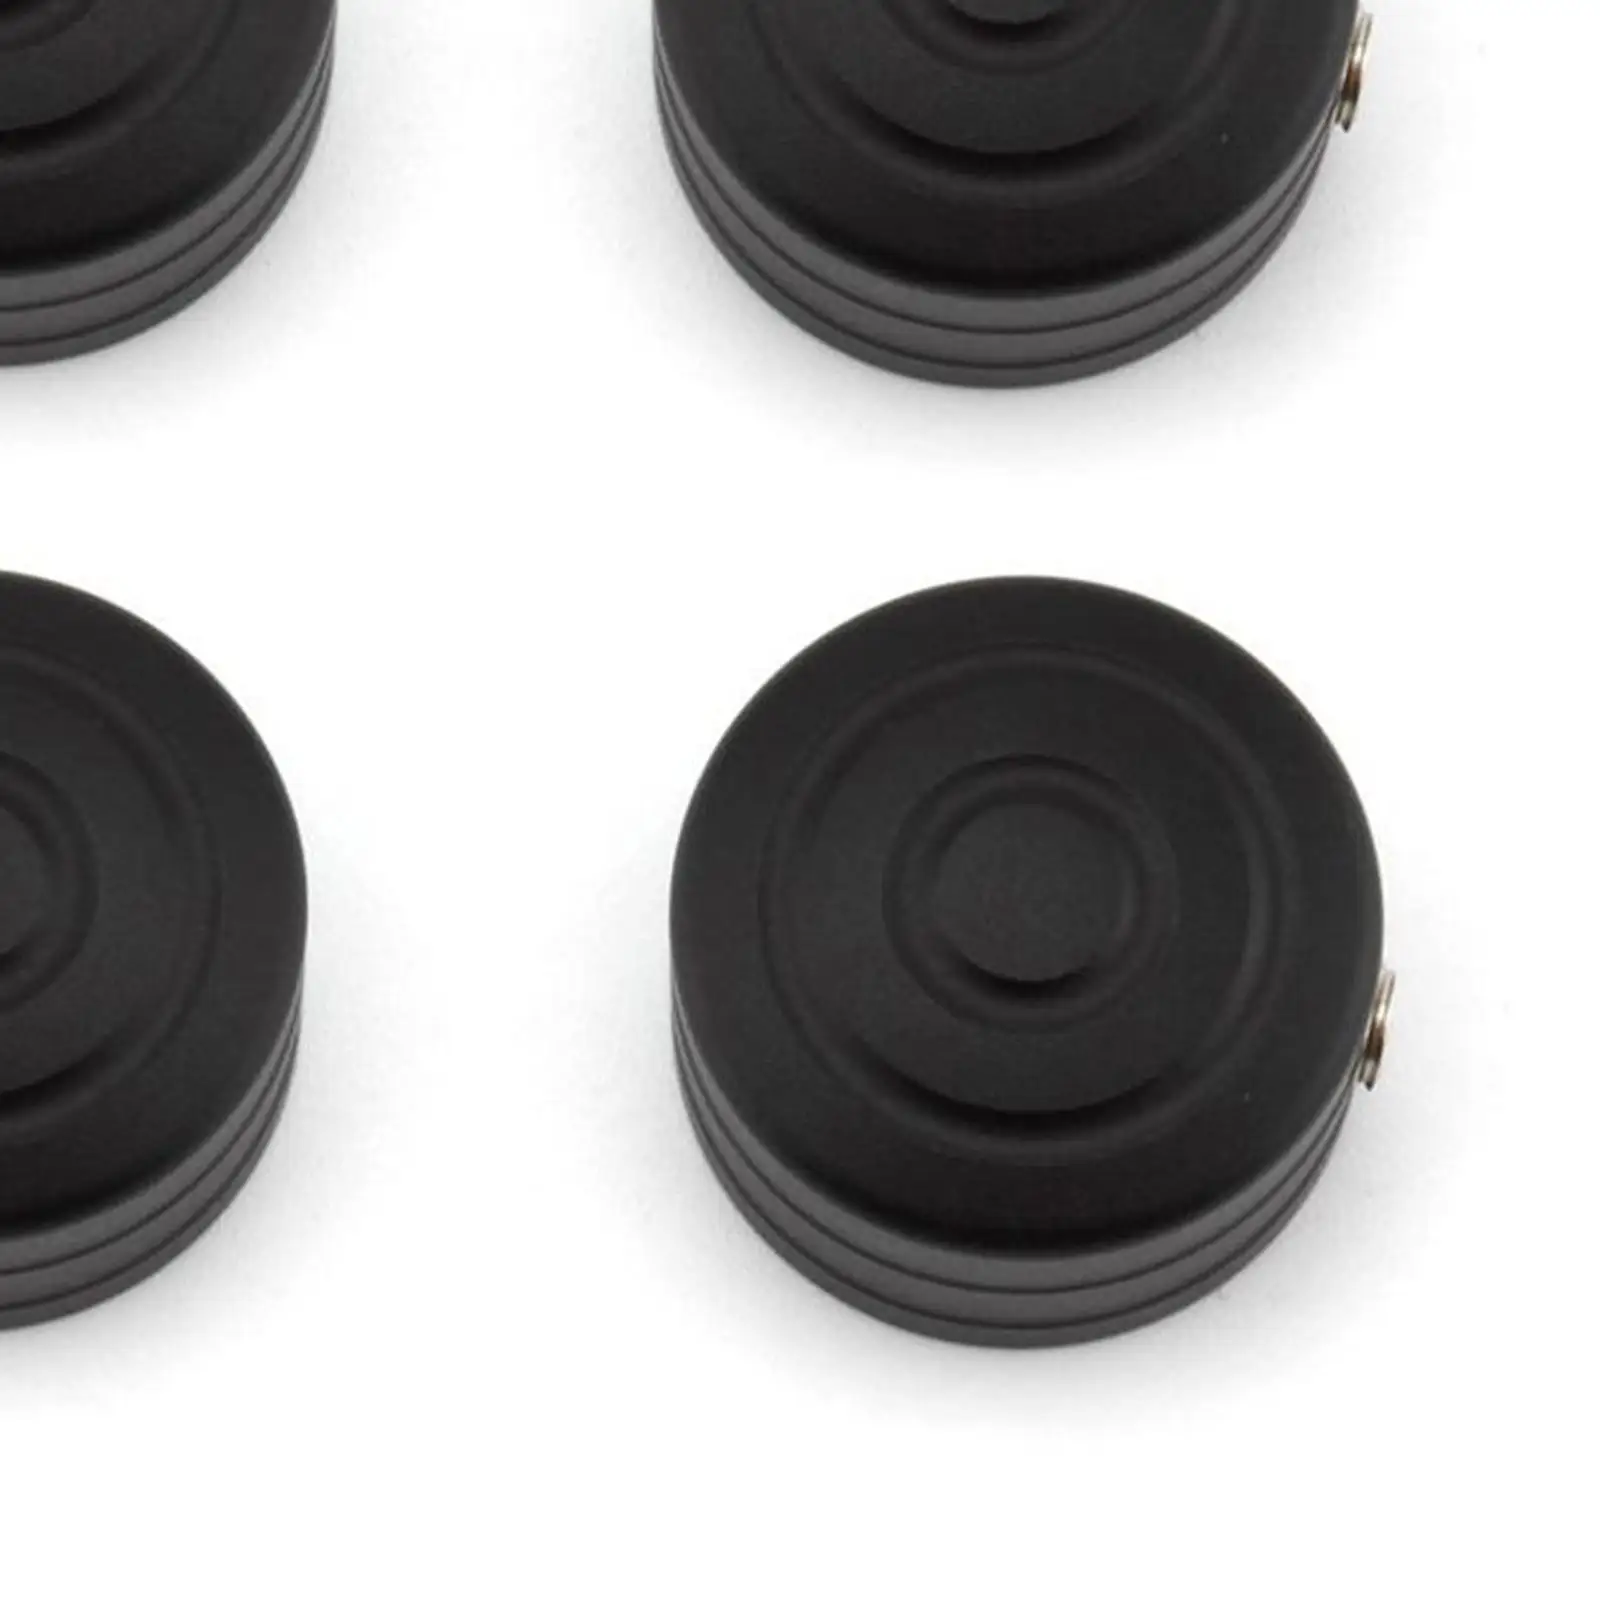 

4x Head Bolts Bolts Caps Nut Cover for T120 Black Circle